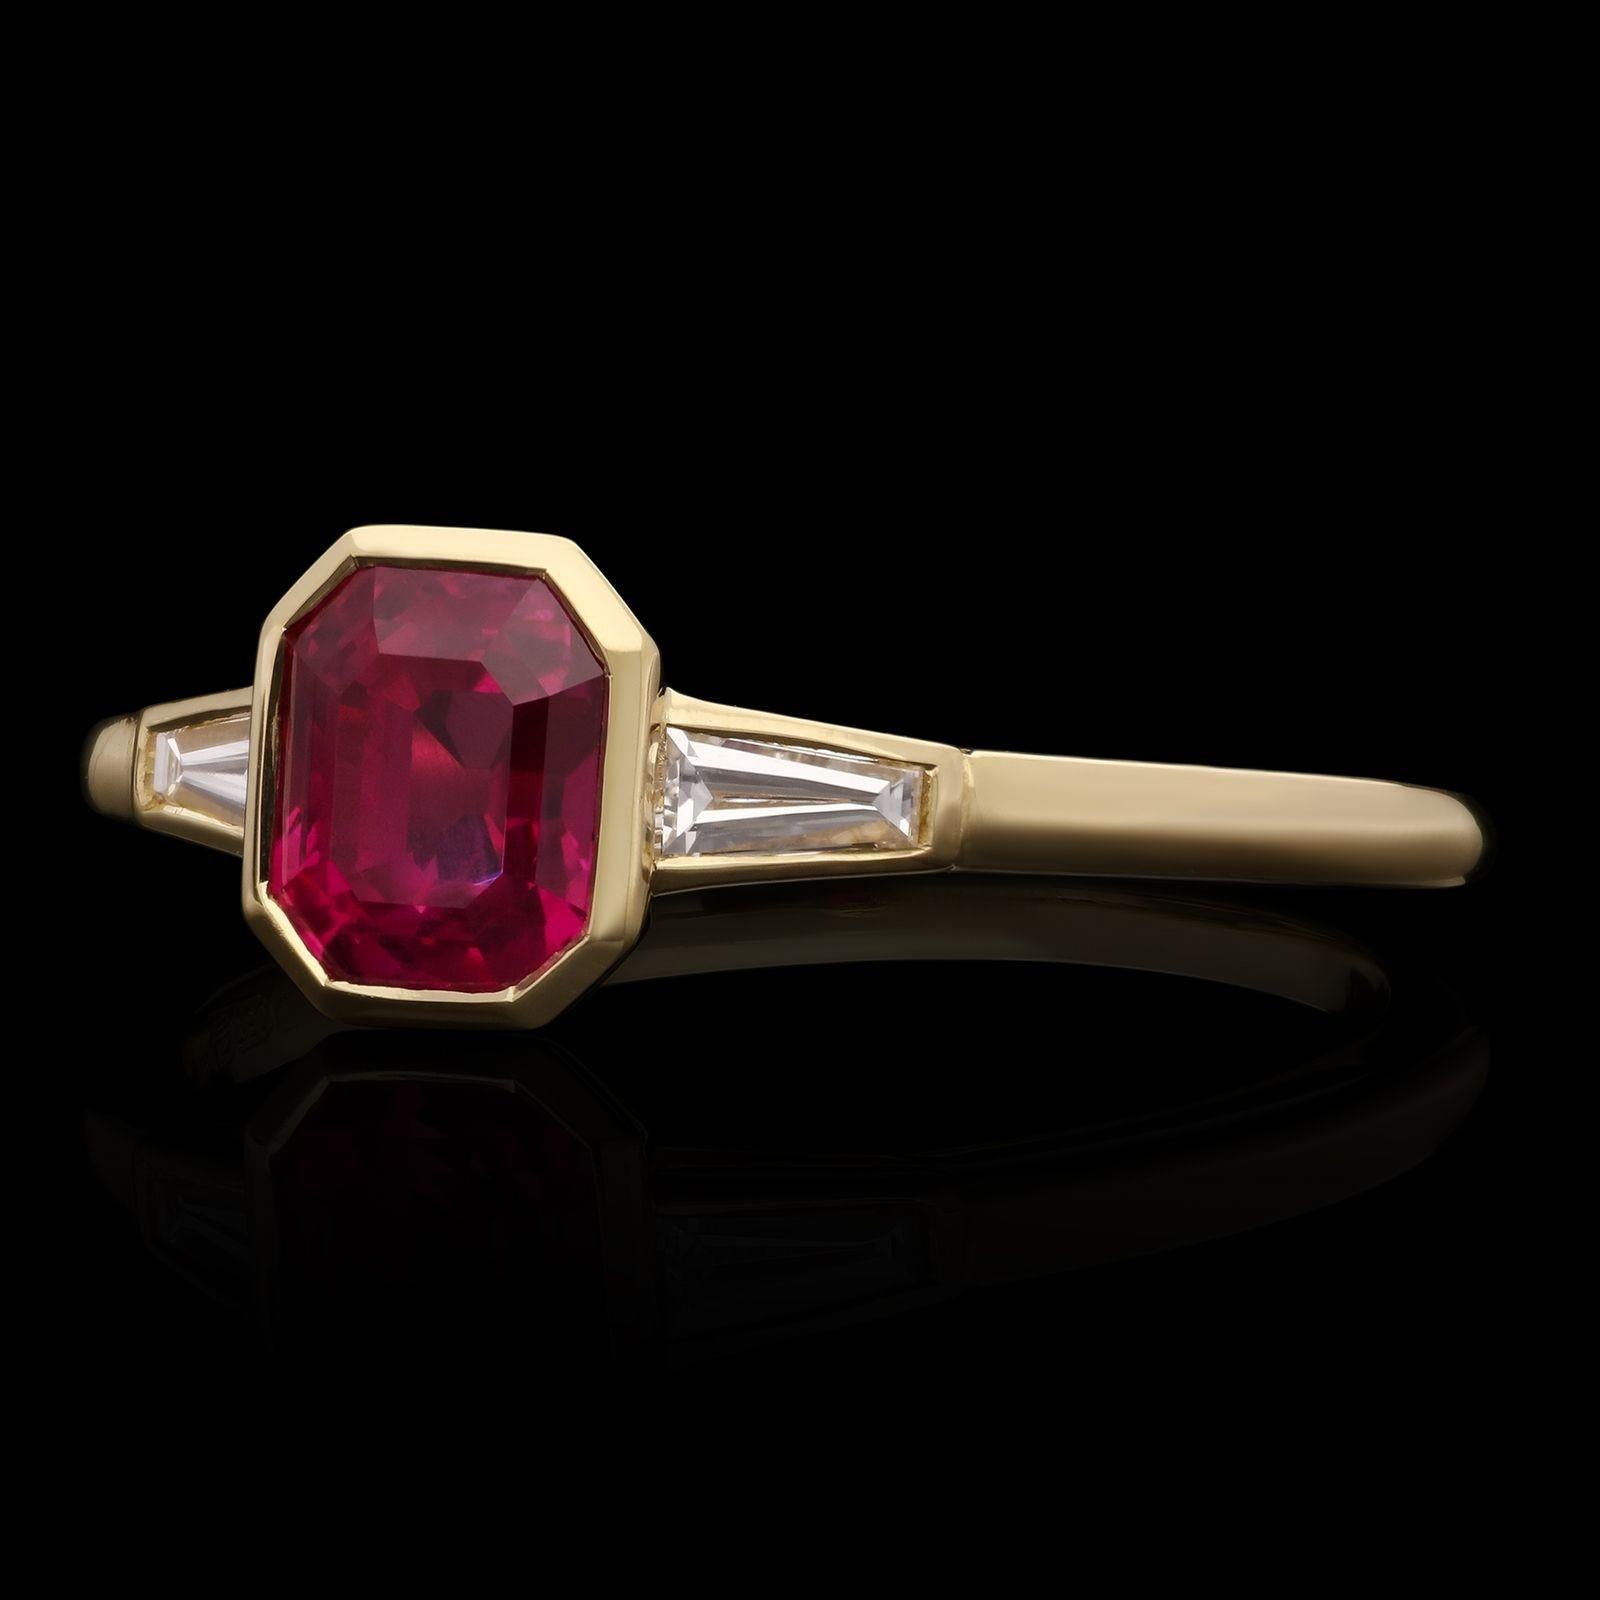 Emerald Cut Hancocks 1.09ct Burmese Ruby Ring With Baguette Diamond Shoulders Contemporary For Sale